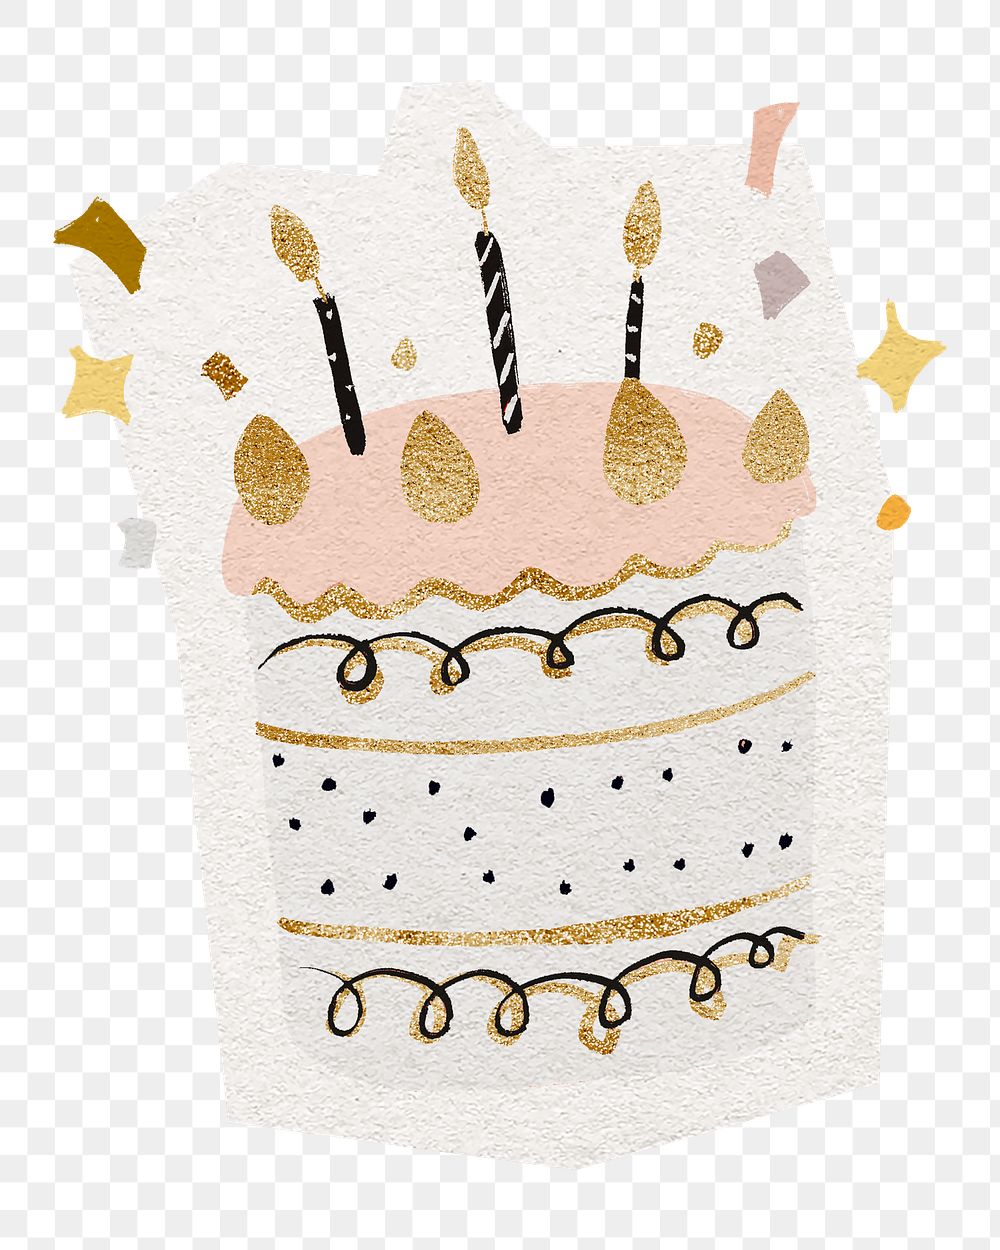 Birthday cake png sticker, cut out paper design, transparent background